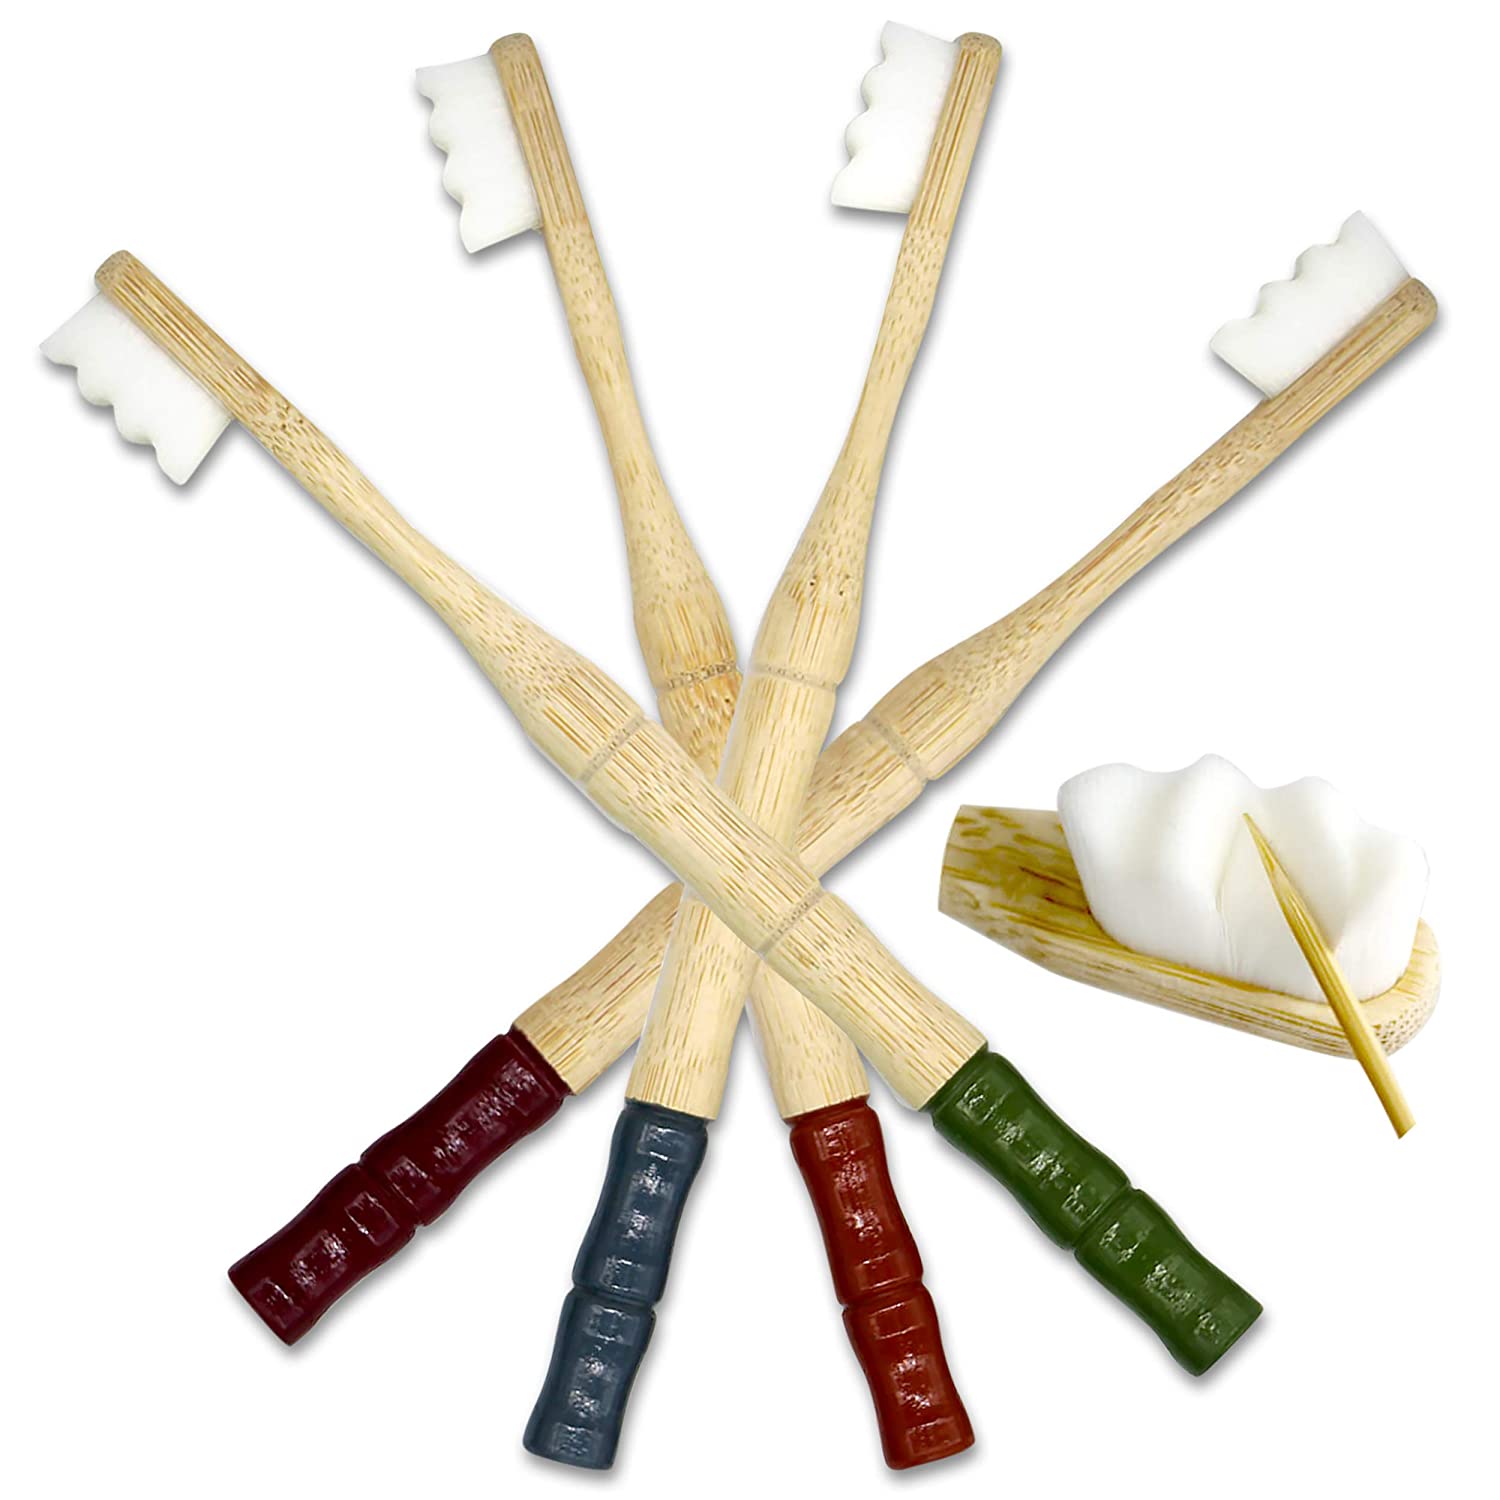 Soft Bristle Toothbrush Bamboo Toothbrushes - 10000 Bristle Toothbrush Pack